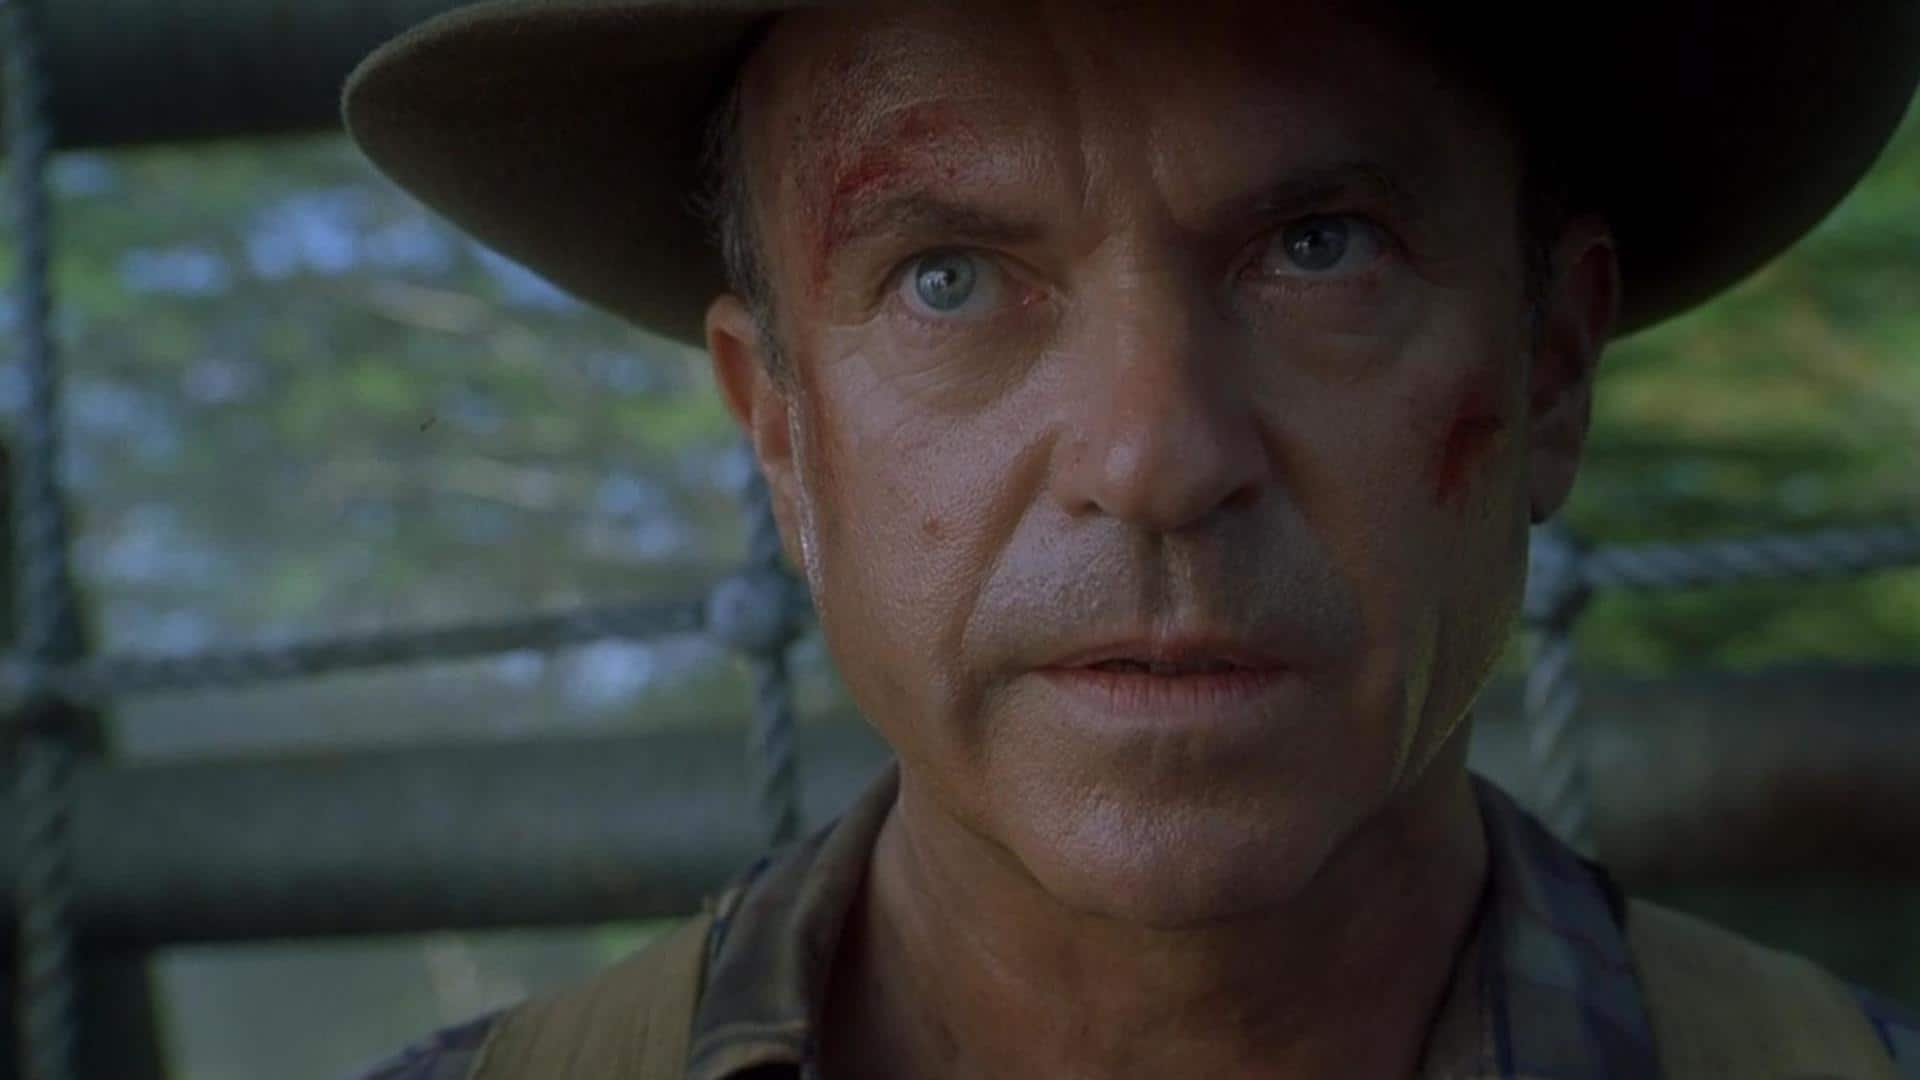 Pleased to be alive: Actor Sam Neill on cancer battle